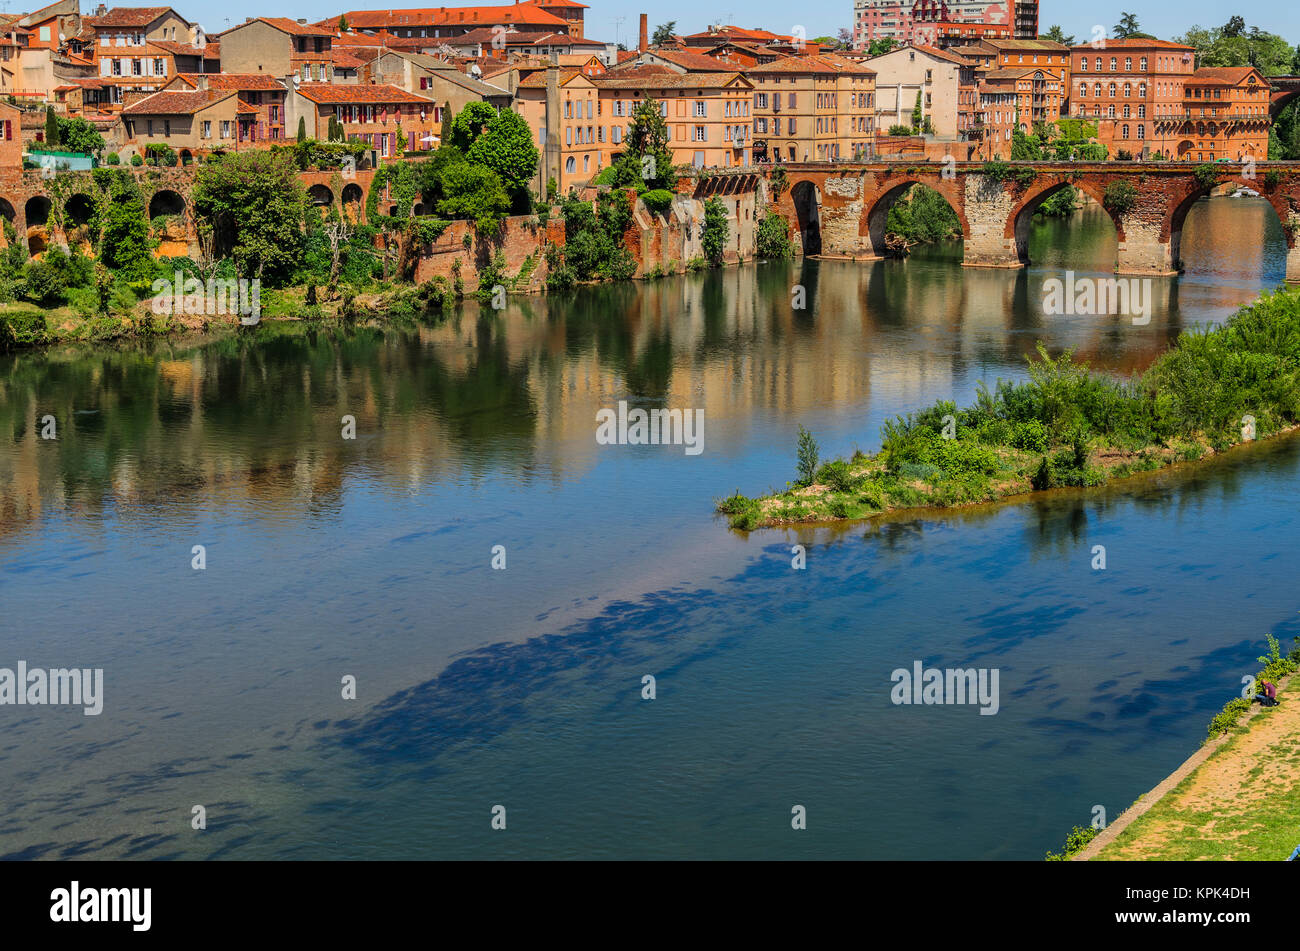 The Tarn River gives the name to the department where the ancient city of french of Albi which we see in the image, which was founded by the Romans wi Stock Photo